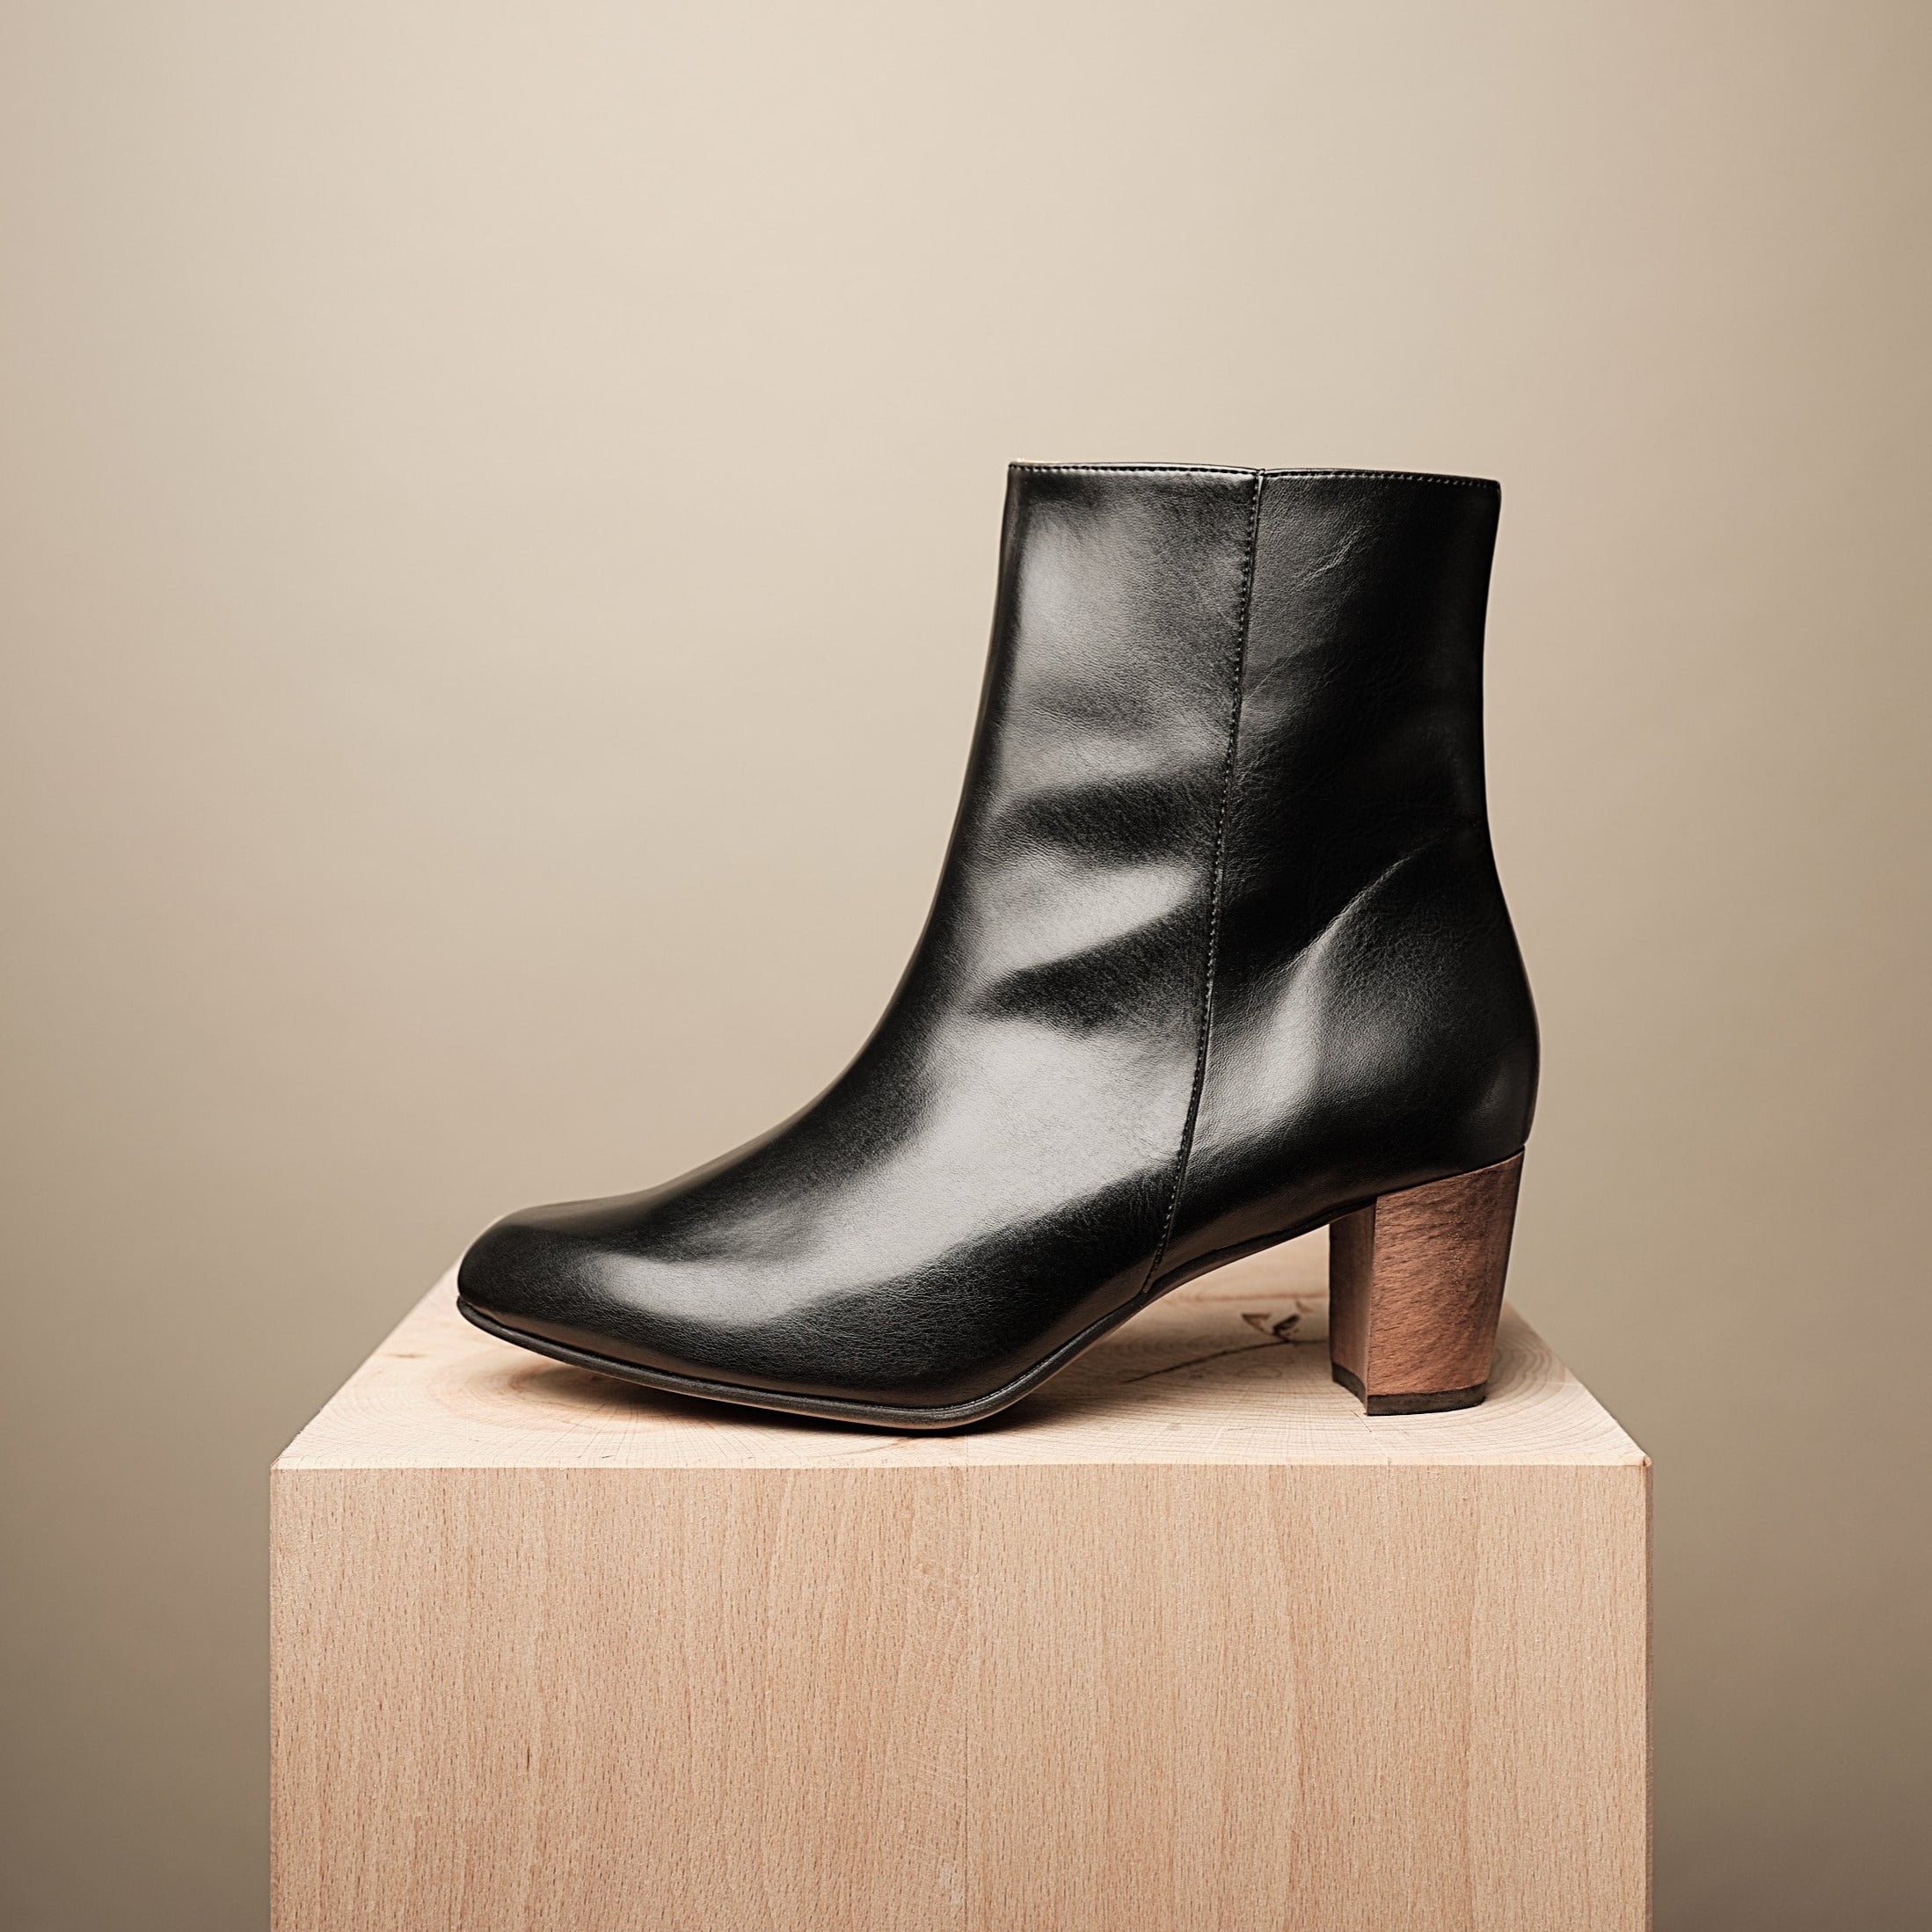 Women's Ankle Boots: Heeled, Low Ankle Boots | Geox ®